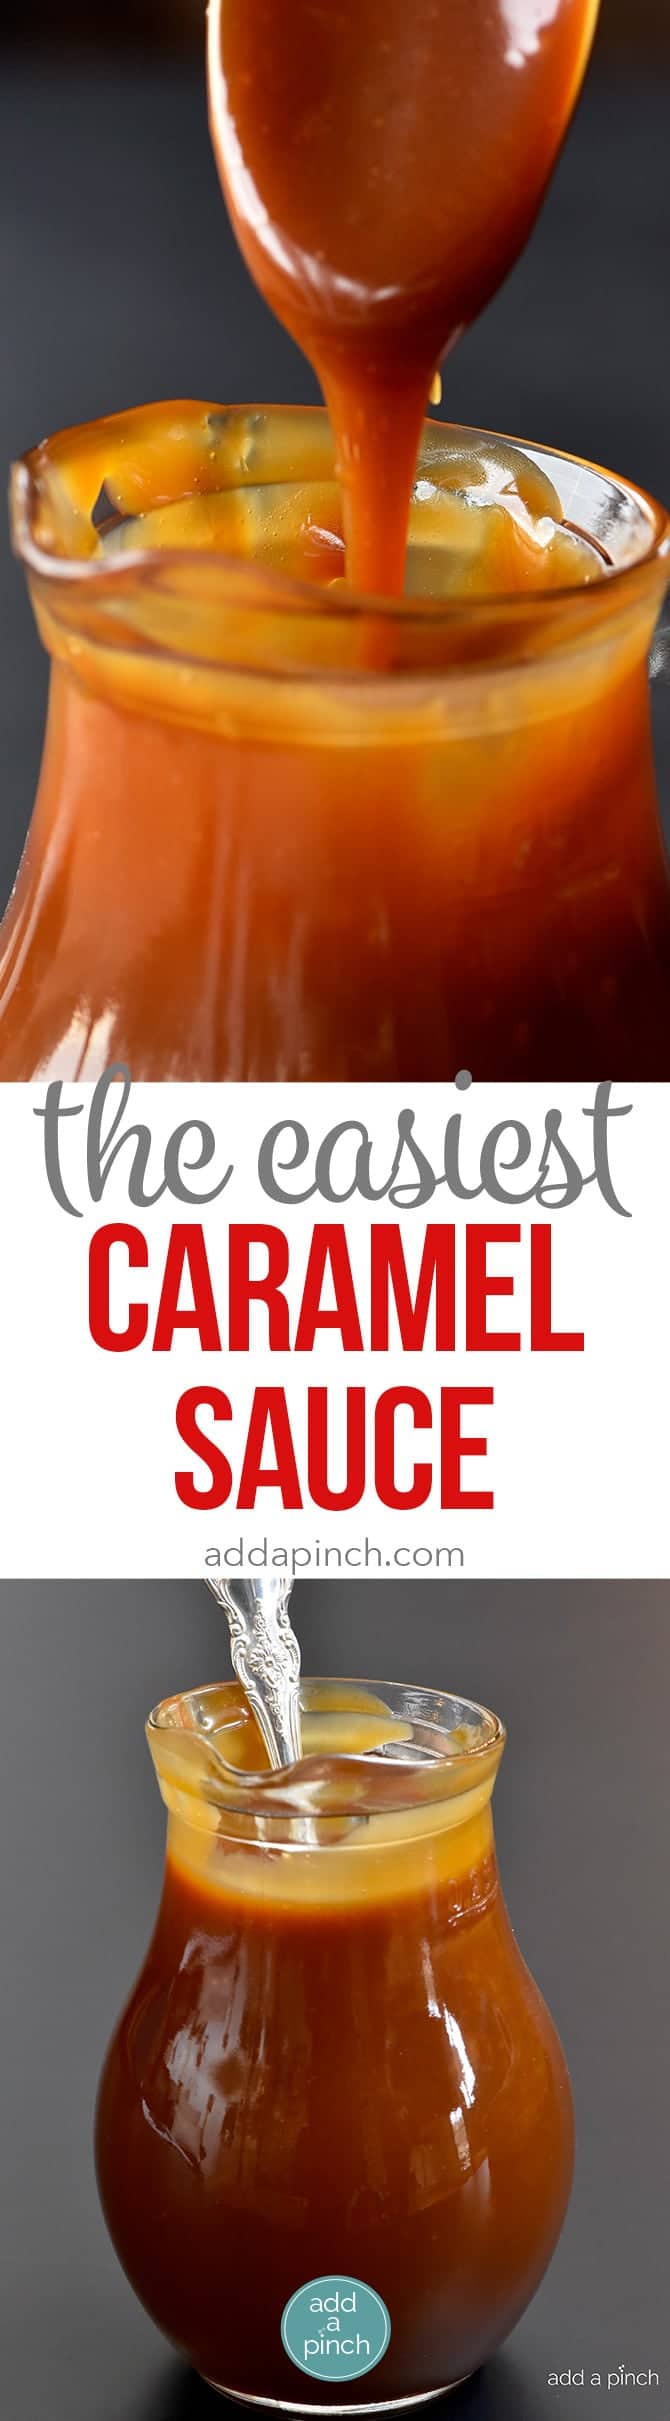 The Easiest Salted Caramel Sauce Recipe - The absolute best salted caramel sauce recipe that I have ever tasted! Smooth, creamy and perfect every single time! // addapinch.com